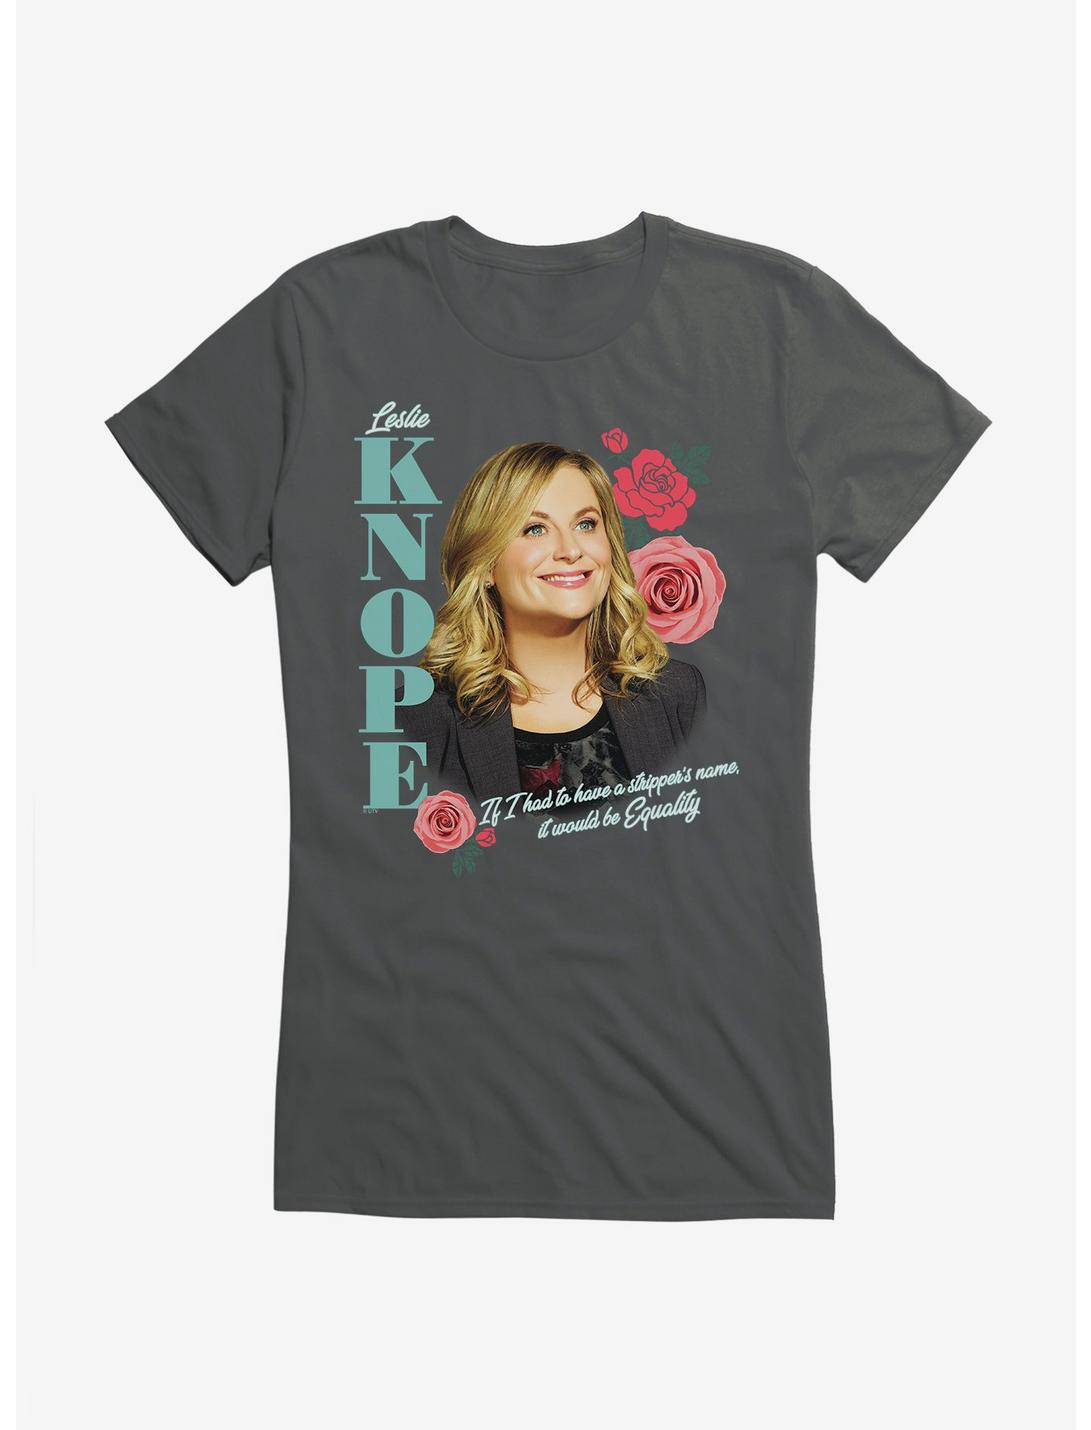 Parks And Recreation Knope Girls T-Shirt, , hi-res